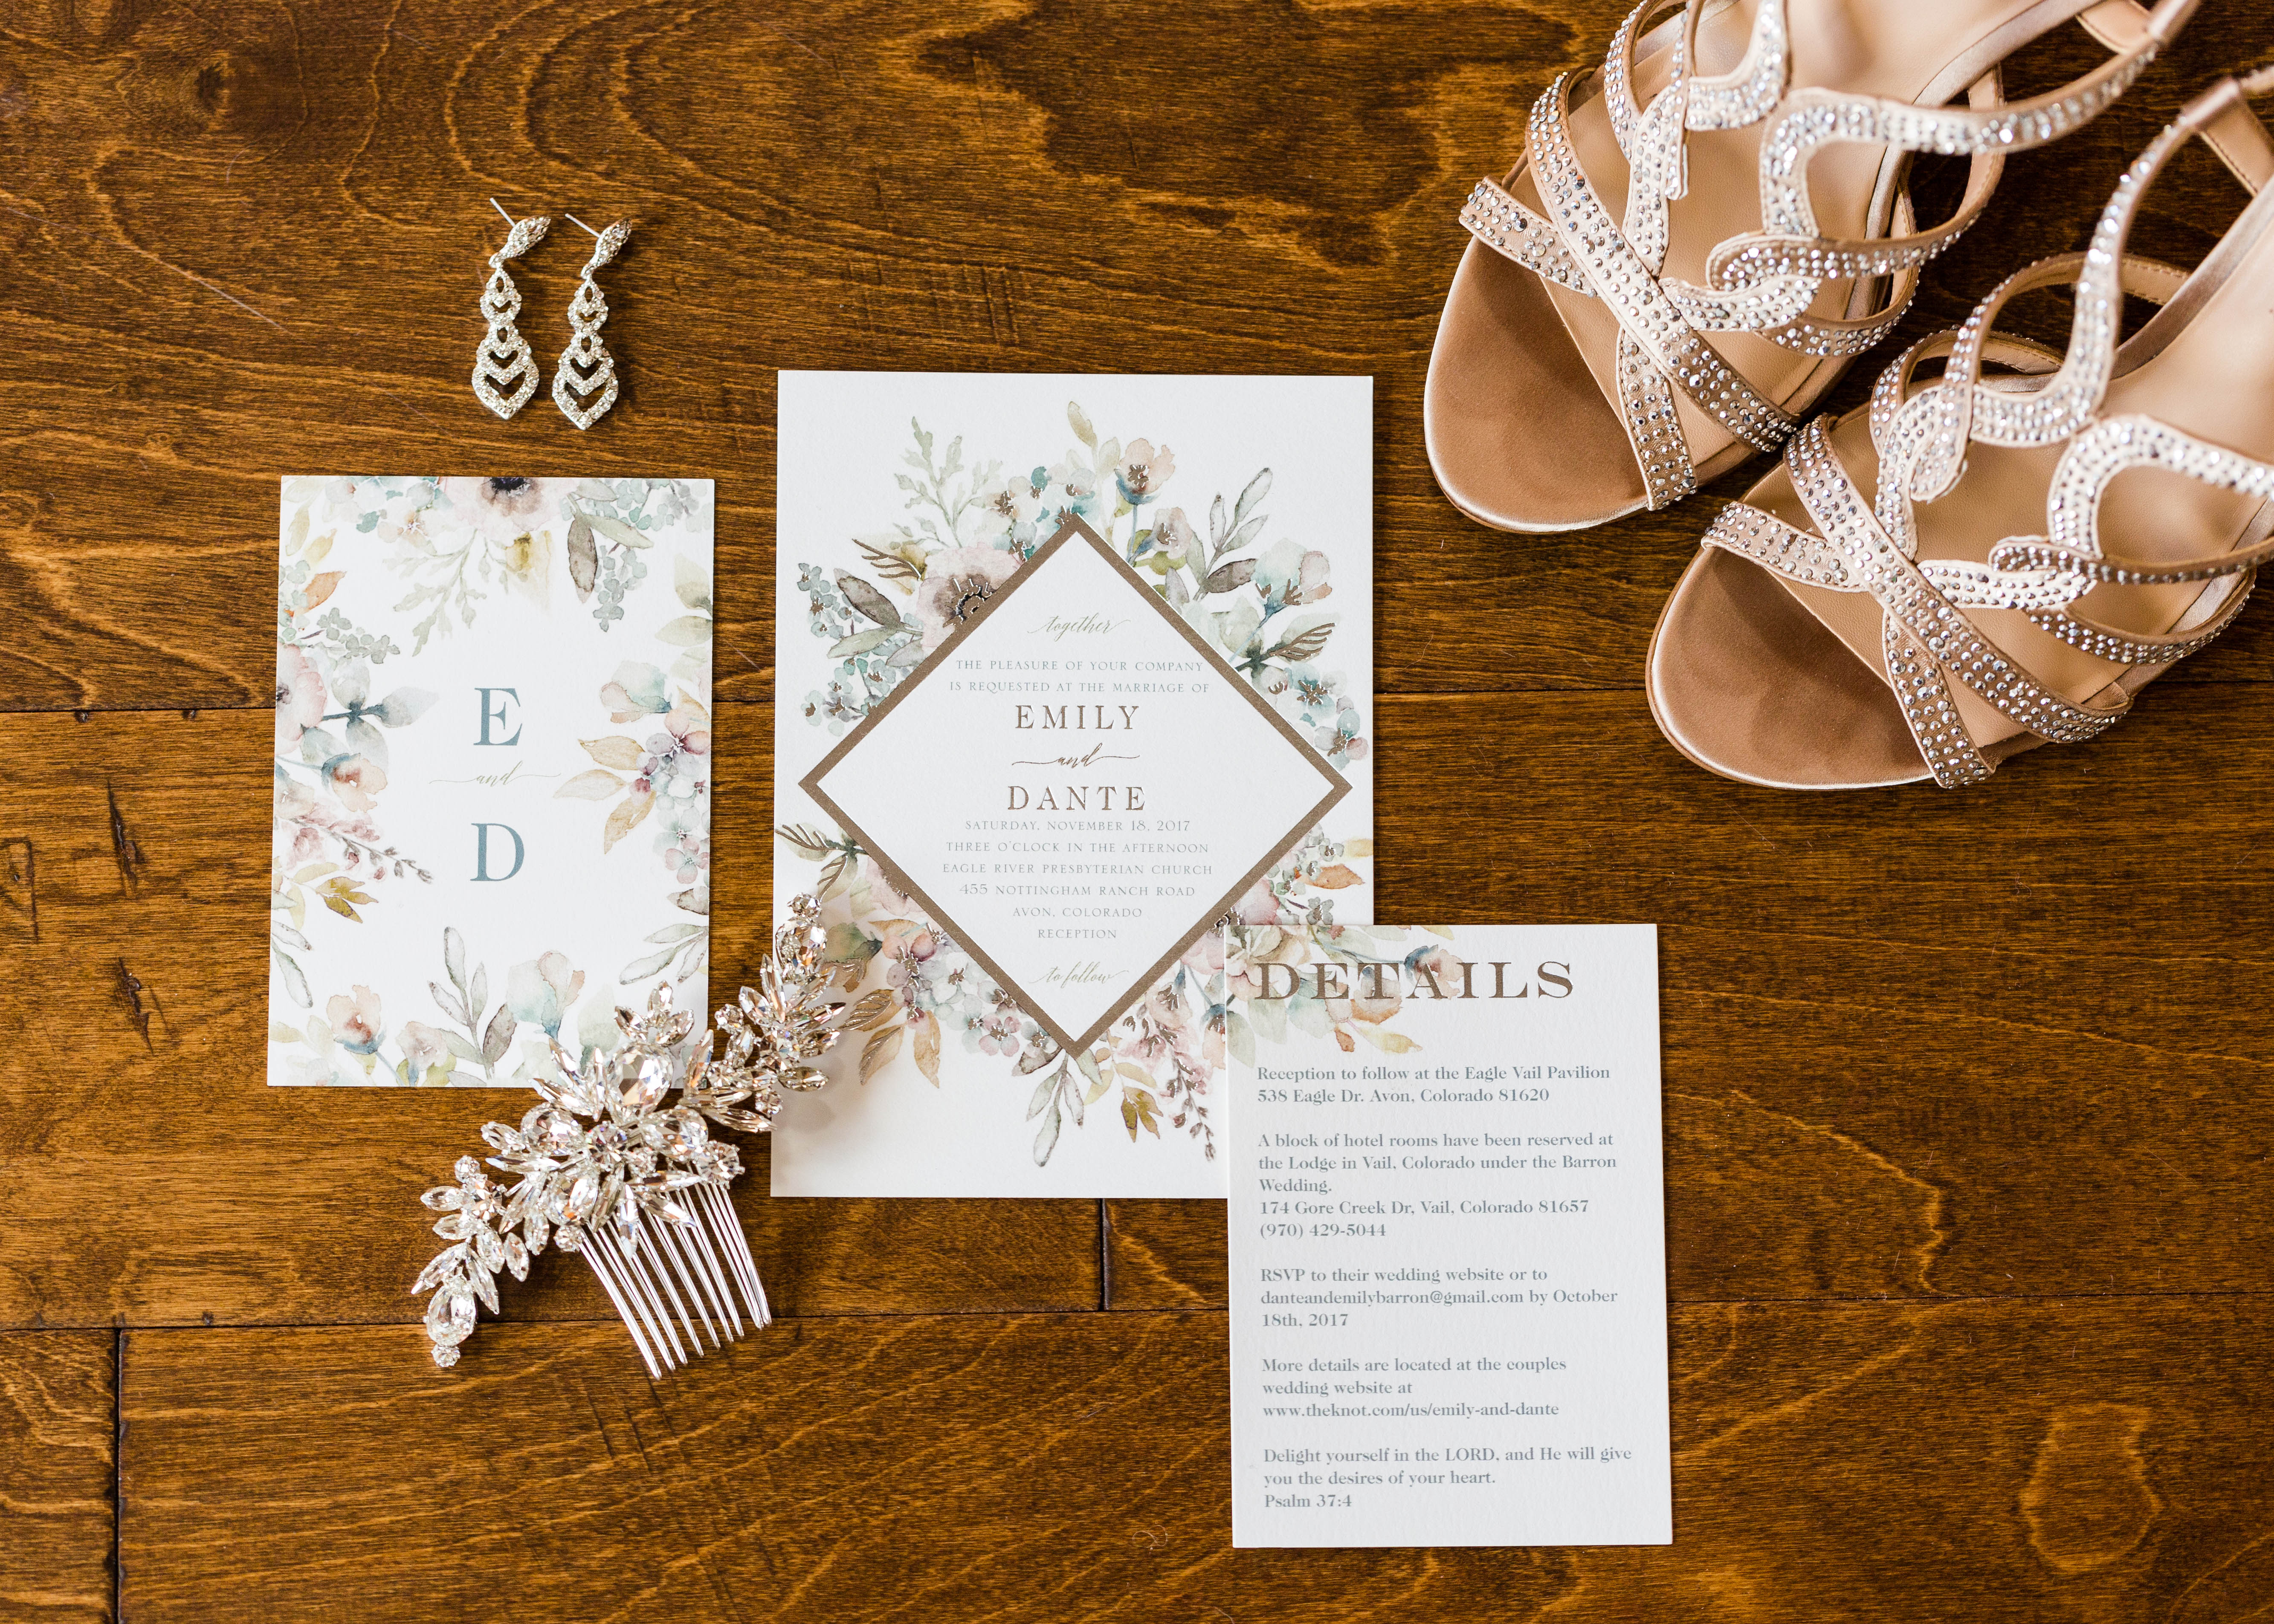 Bride's crystal studded shoes, earrings and floral invitations are nicely arranged on a wood floor